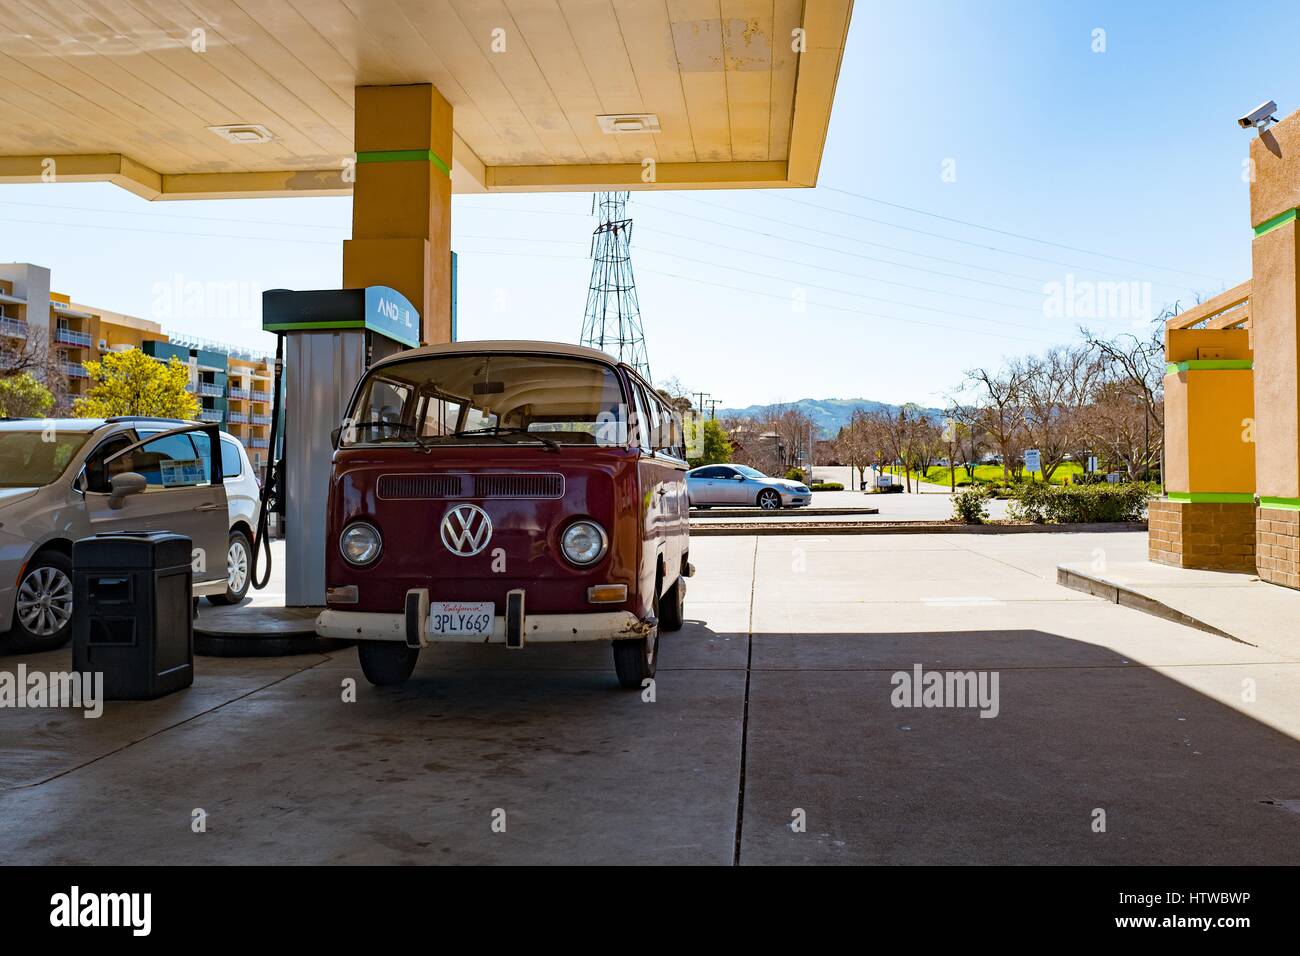 Vintage Volkswagen bus receiving fuel at a modern gas station, Walnut Creek, California, February 26, 2017 Stock Photo